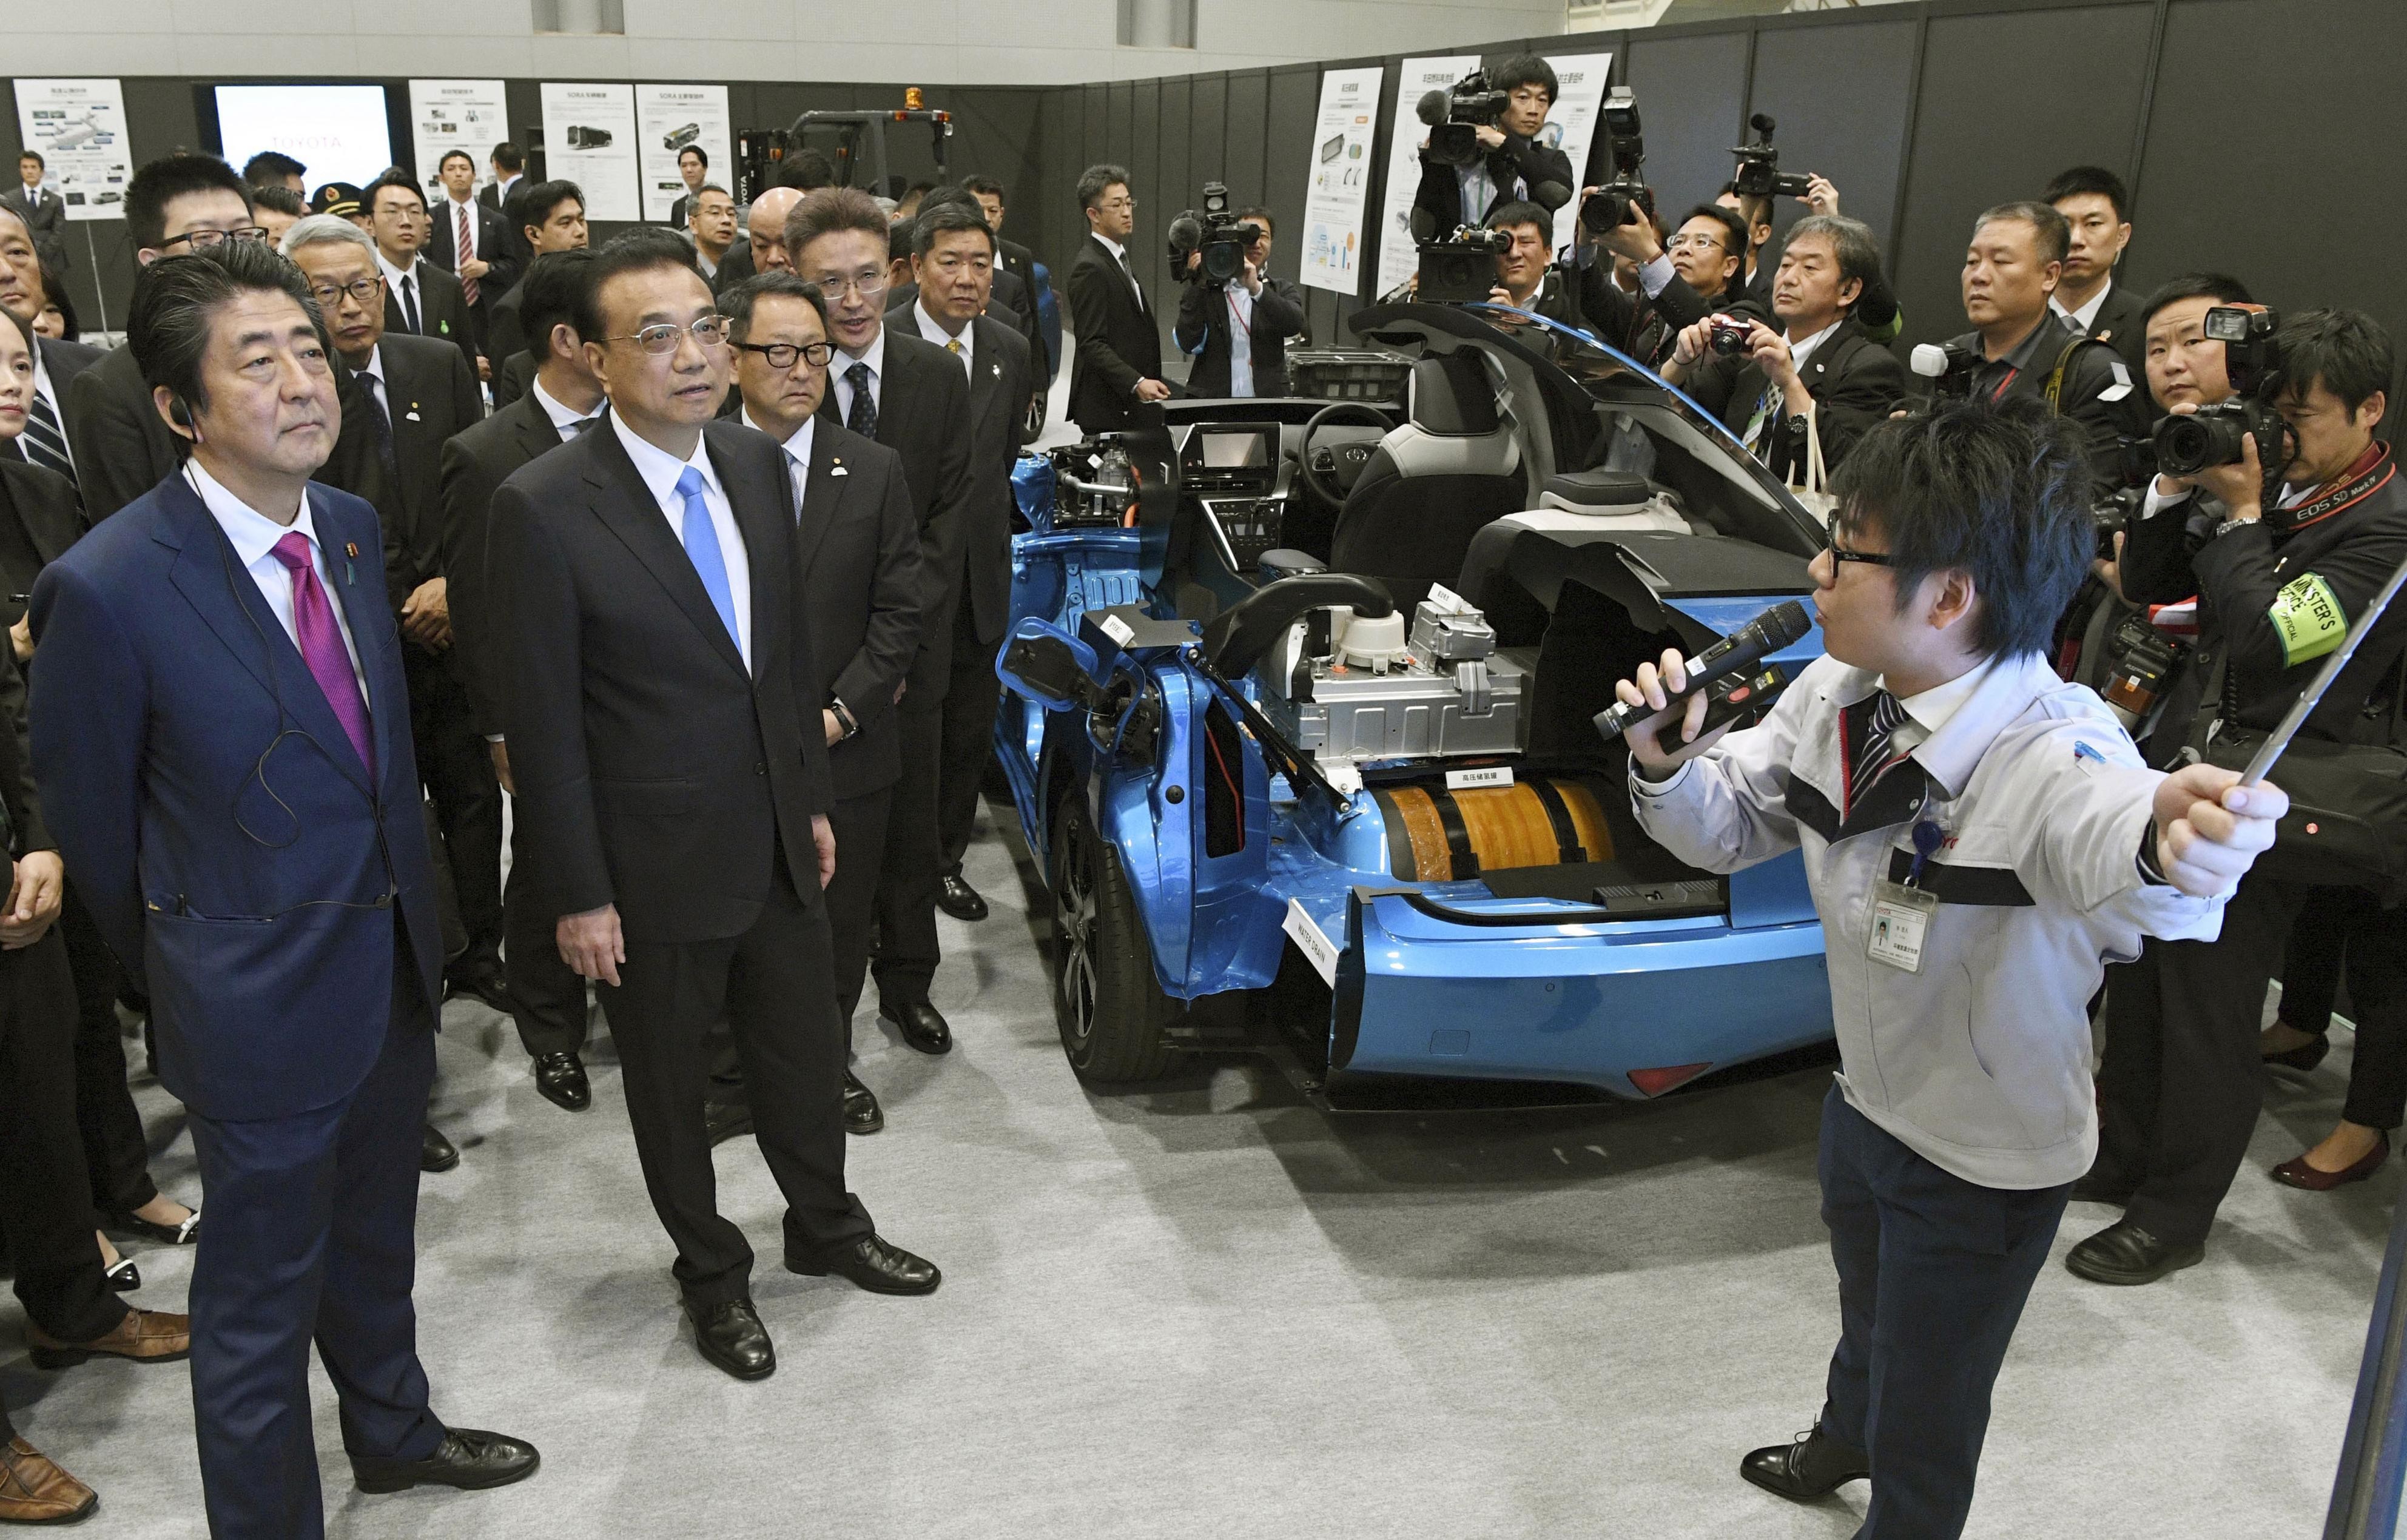 China’s premier, Li Keqiang (second from left), and Japan’s prime minister, Shinzo Abe (left), visit a Toyota factory in Tomakomai on Japan's northernmost main island of Hokkaido. Photo: Kyodo